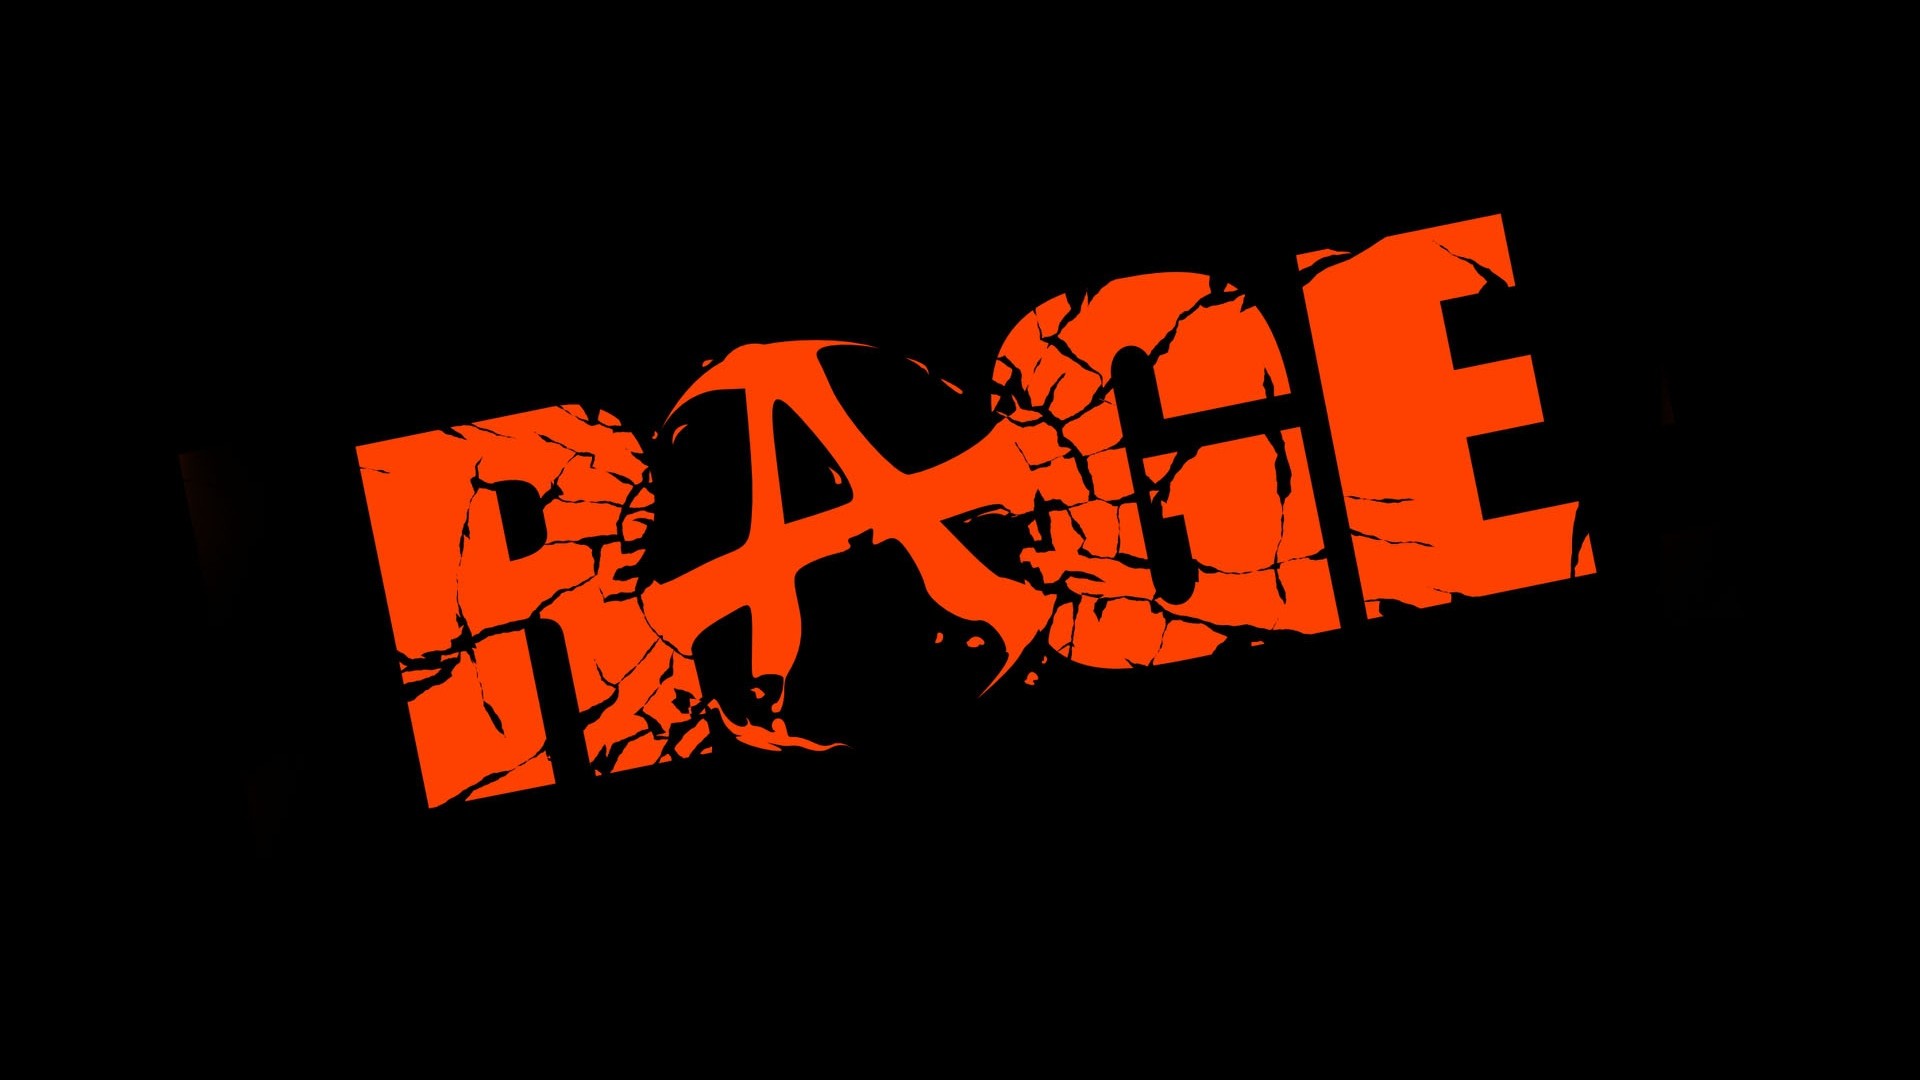 1920x1080 Awesome Rage Font Name Game Background Download Image Â« Pin HD Wallpapers